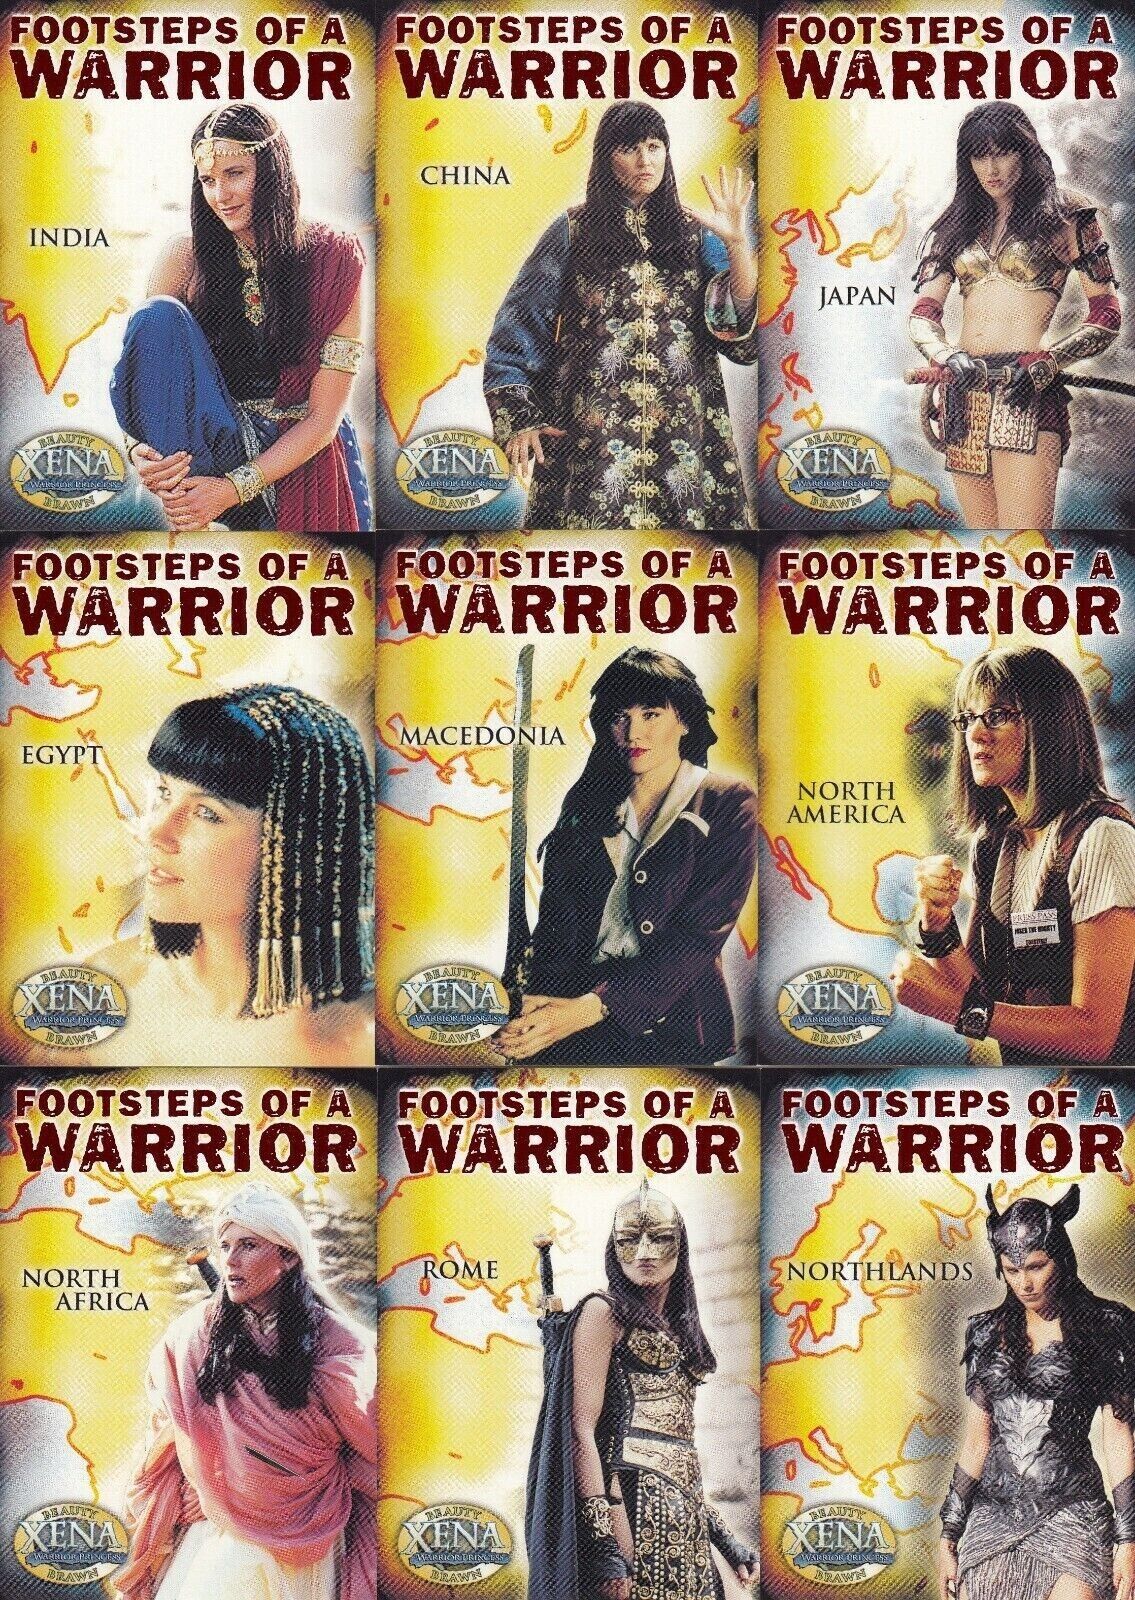 Xena Beauty &Brawn Footsteps of a Warrior FW1-FW9~Insert Set Princess Puzzle Map